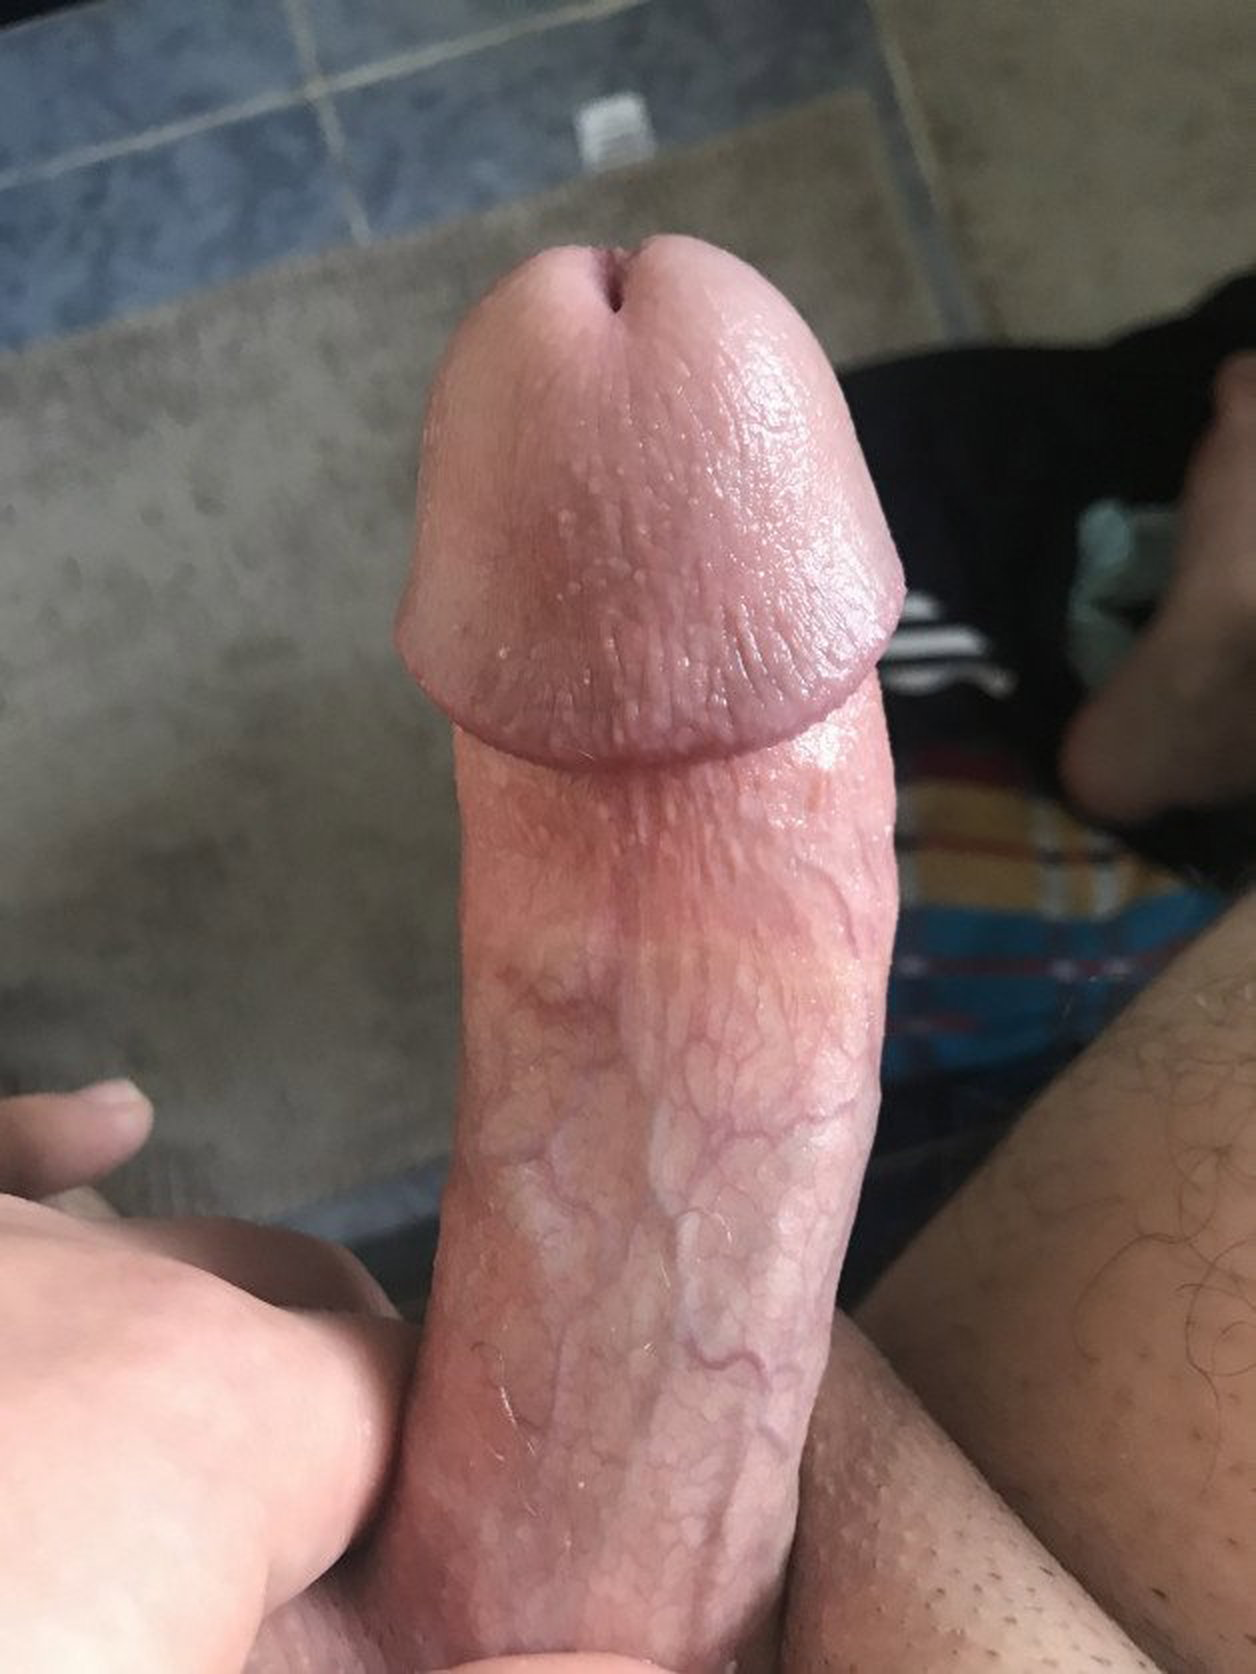 Photo by Hornymen333 with the username @Hornymen333, posted on October 25, 2021. The post is about the topic Big dicks and the text says 'fresh young dick'